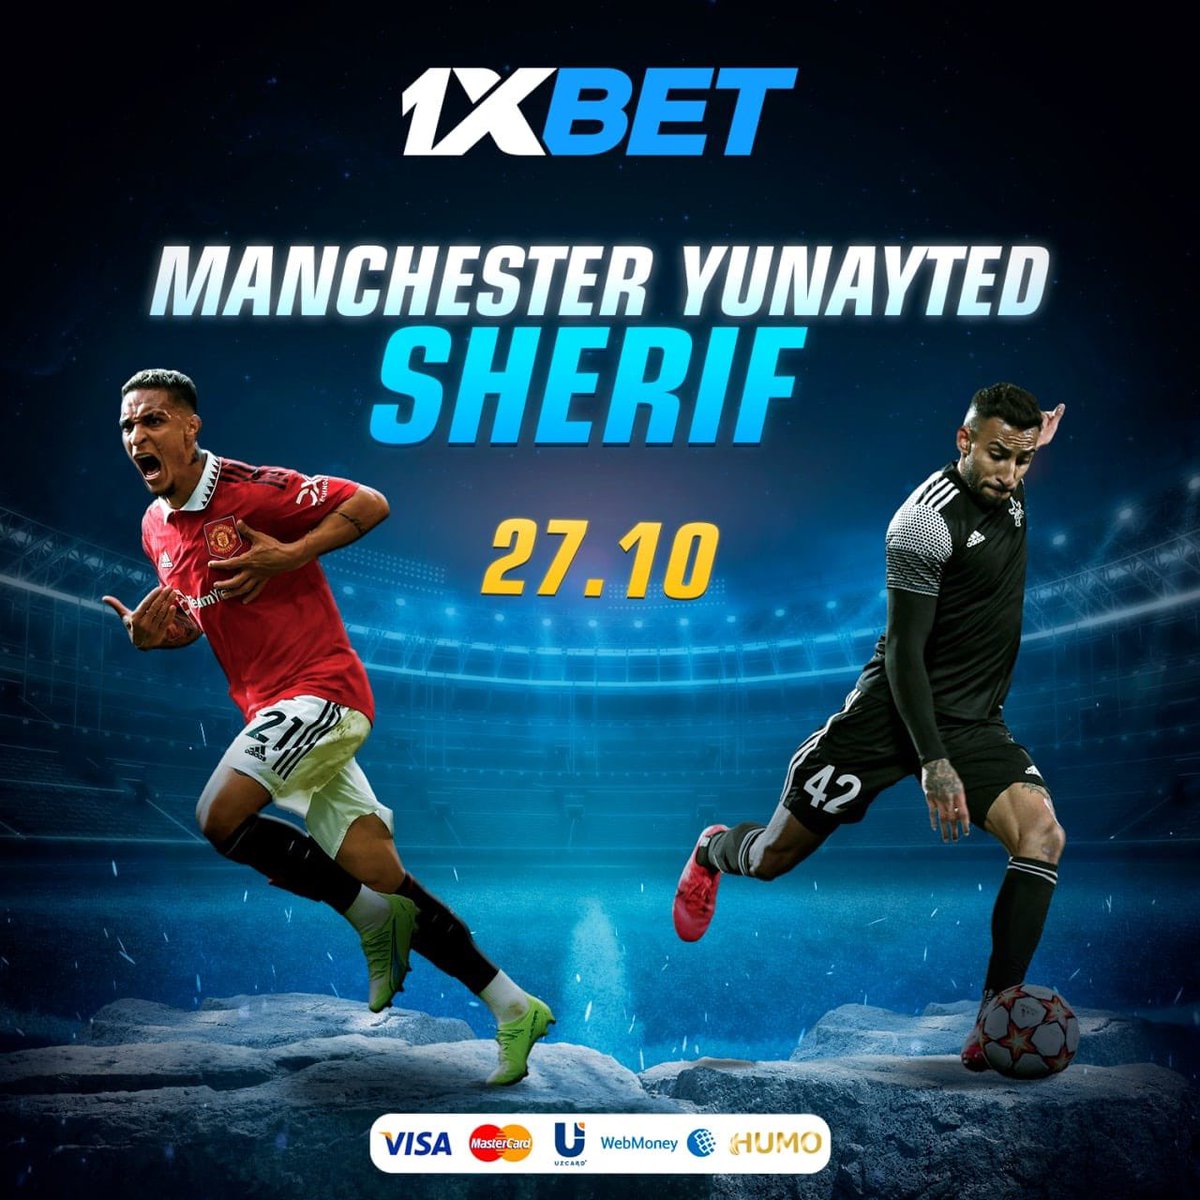 🔥💰Catch up Manchester United and Sherif showdowns with 1xBet!. United's Europa League campaign continues against FC Sheriff at Old Trafford this evening. Bet on these and other Europa League matches at 1xBet. Sign up:bit.ly/3CvV1PM Promo code: HAJIAY